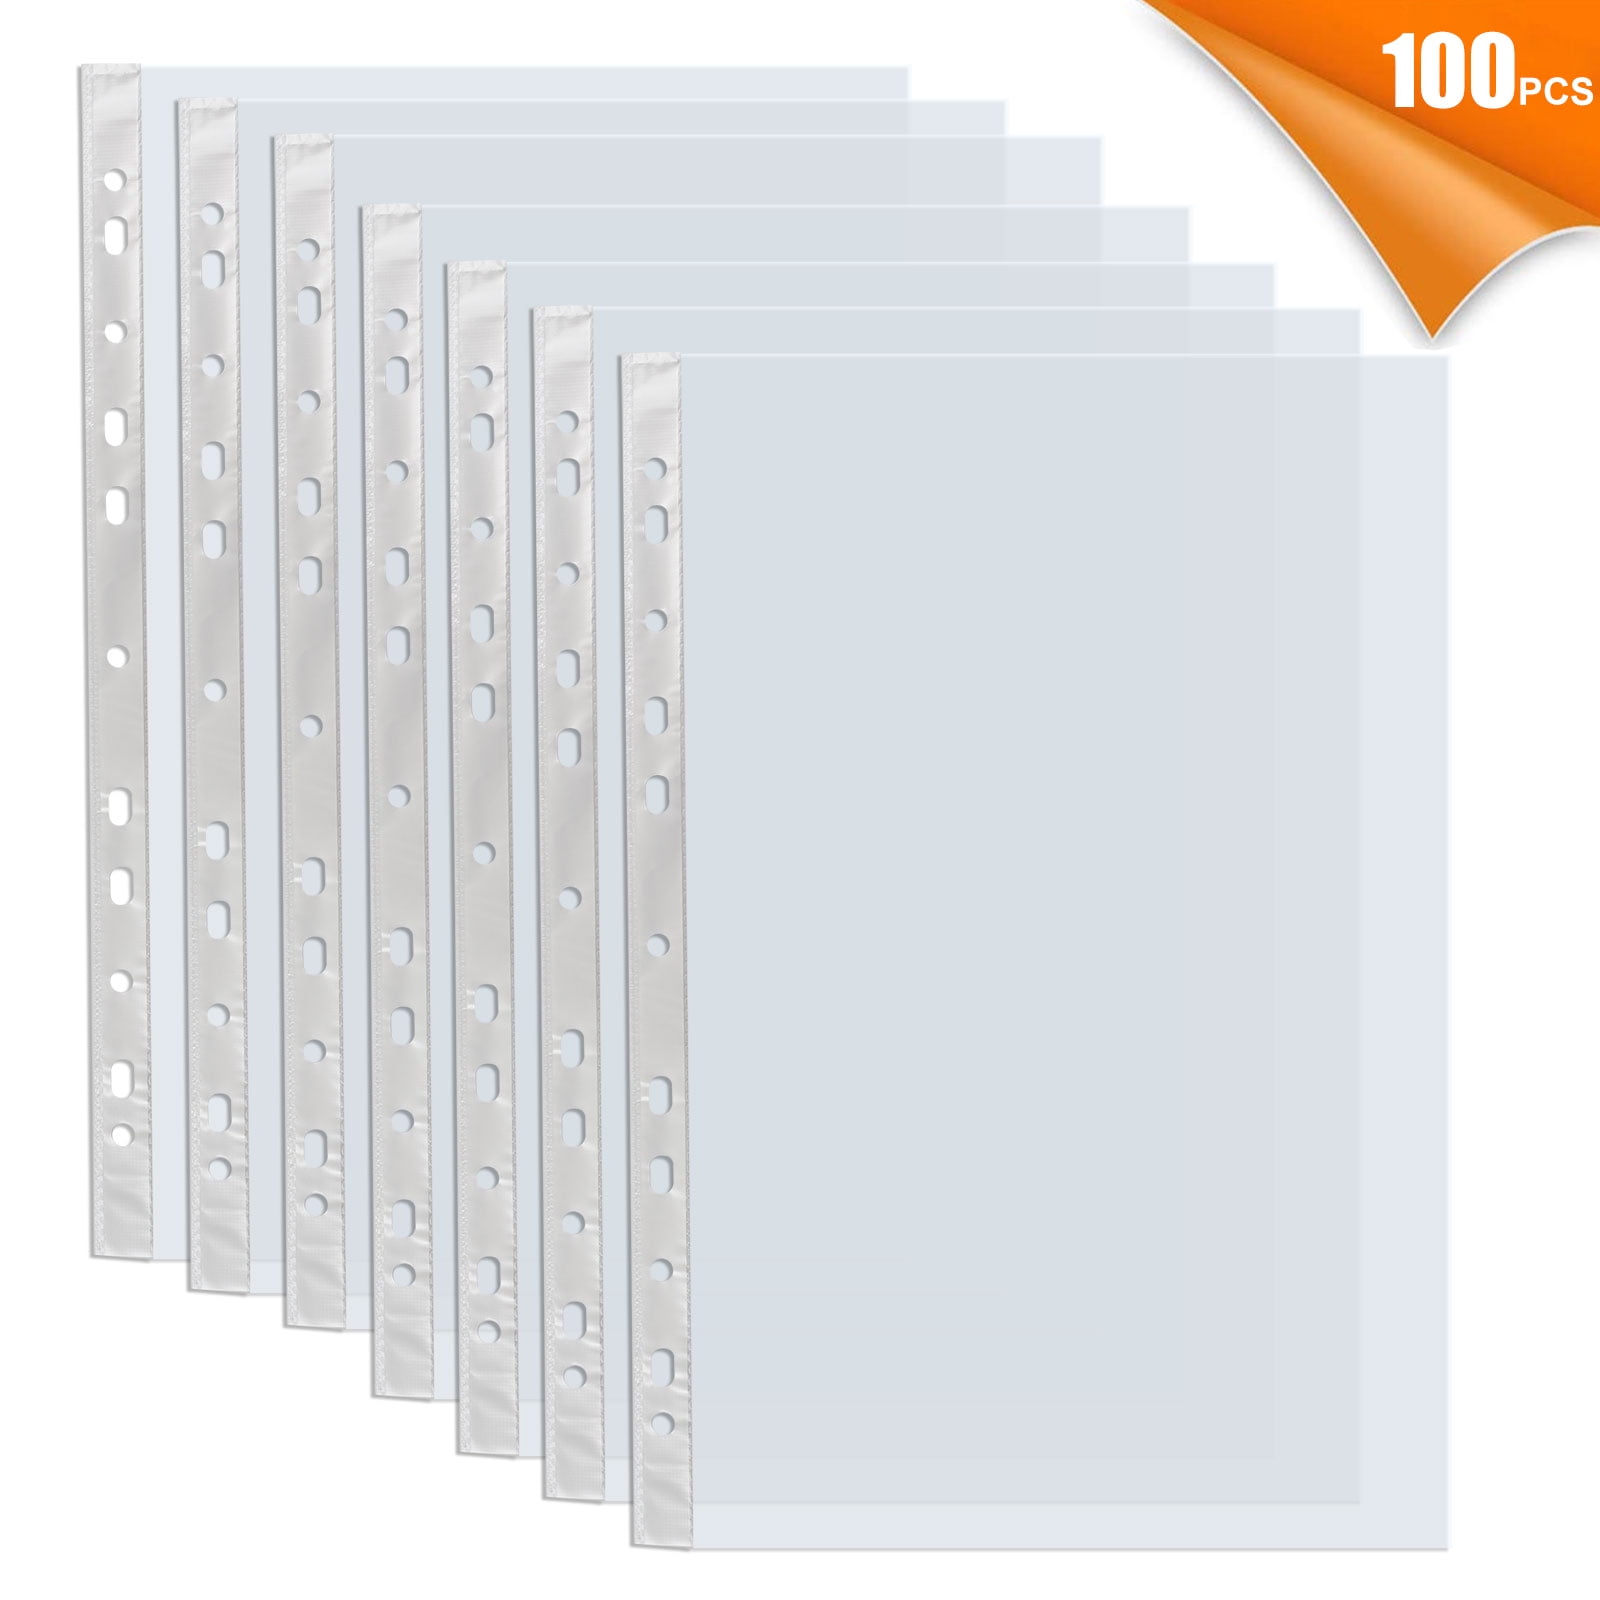 11 X 17 Sheet Protectors Portrait View Protect and Display 11x17